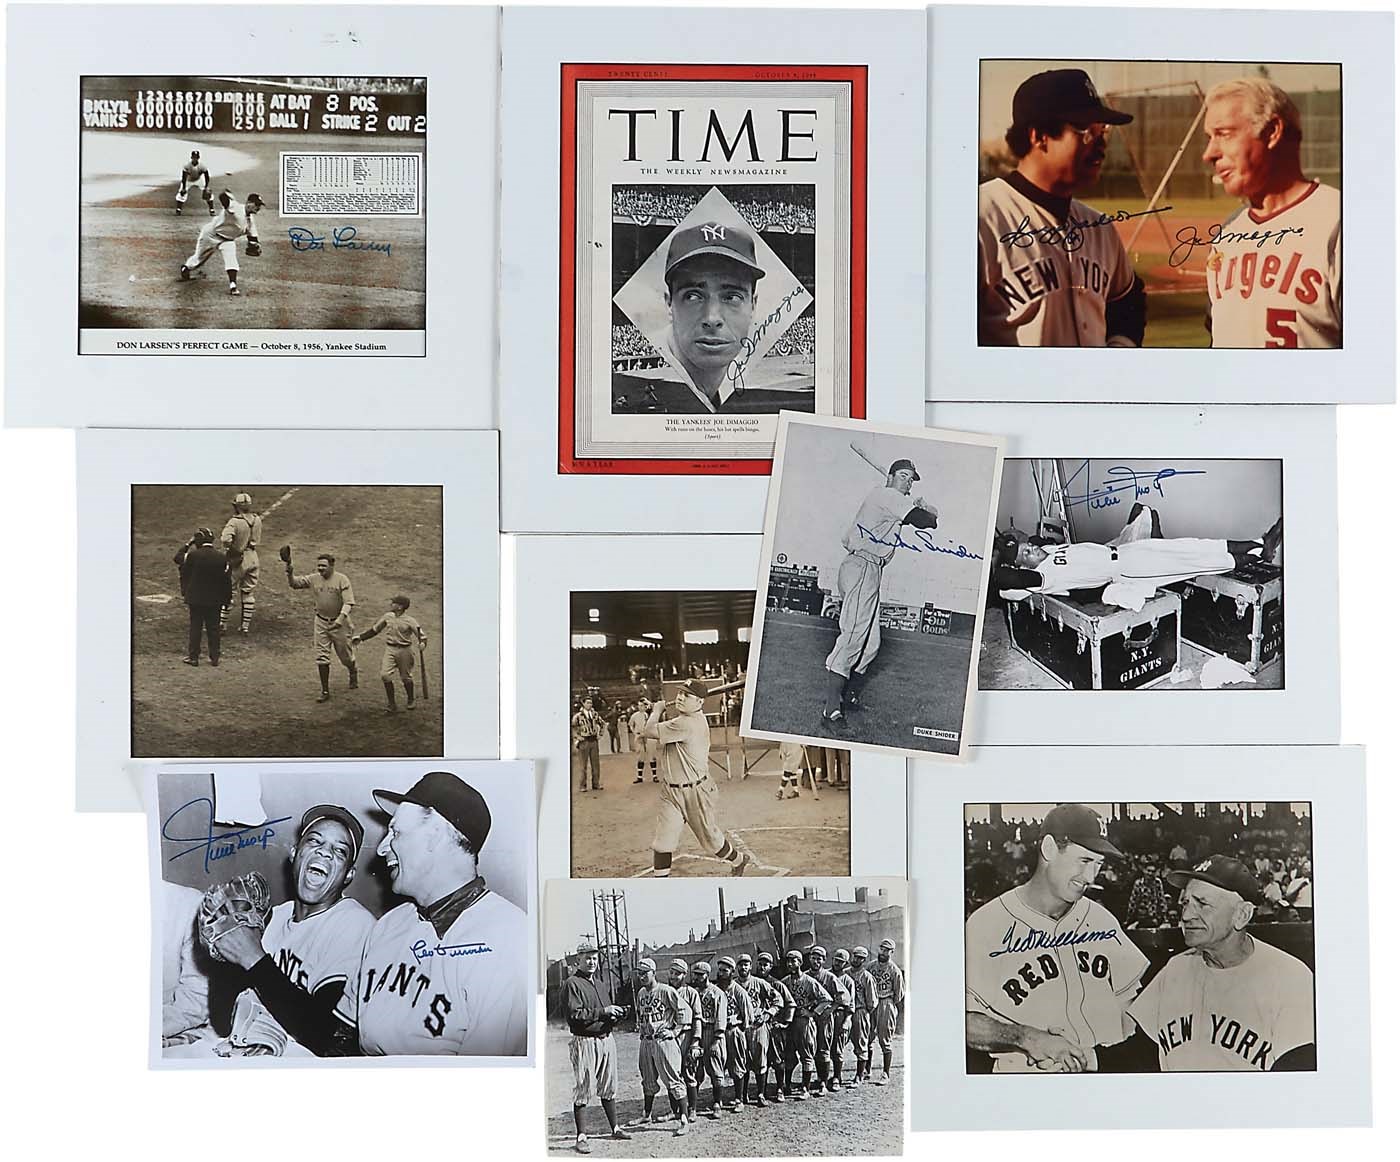 Baseball Autographs - Signed Photos with DiMaggio, Williams and Mays (9)